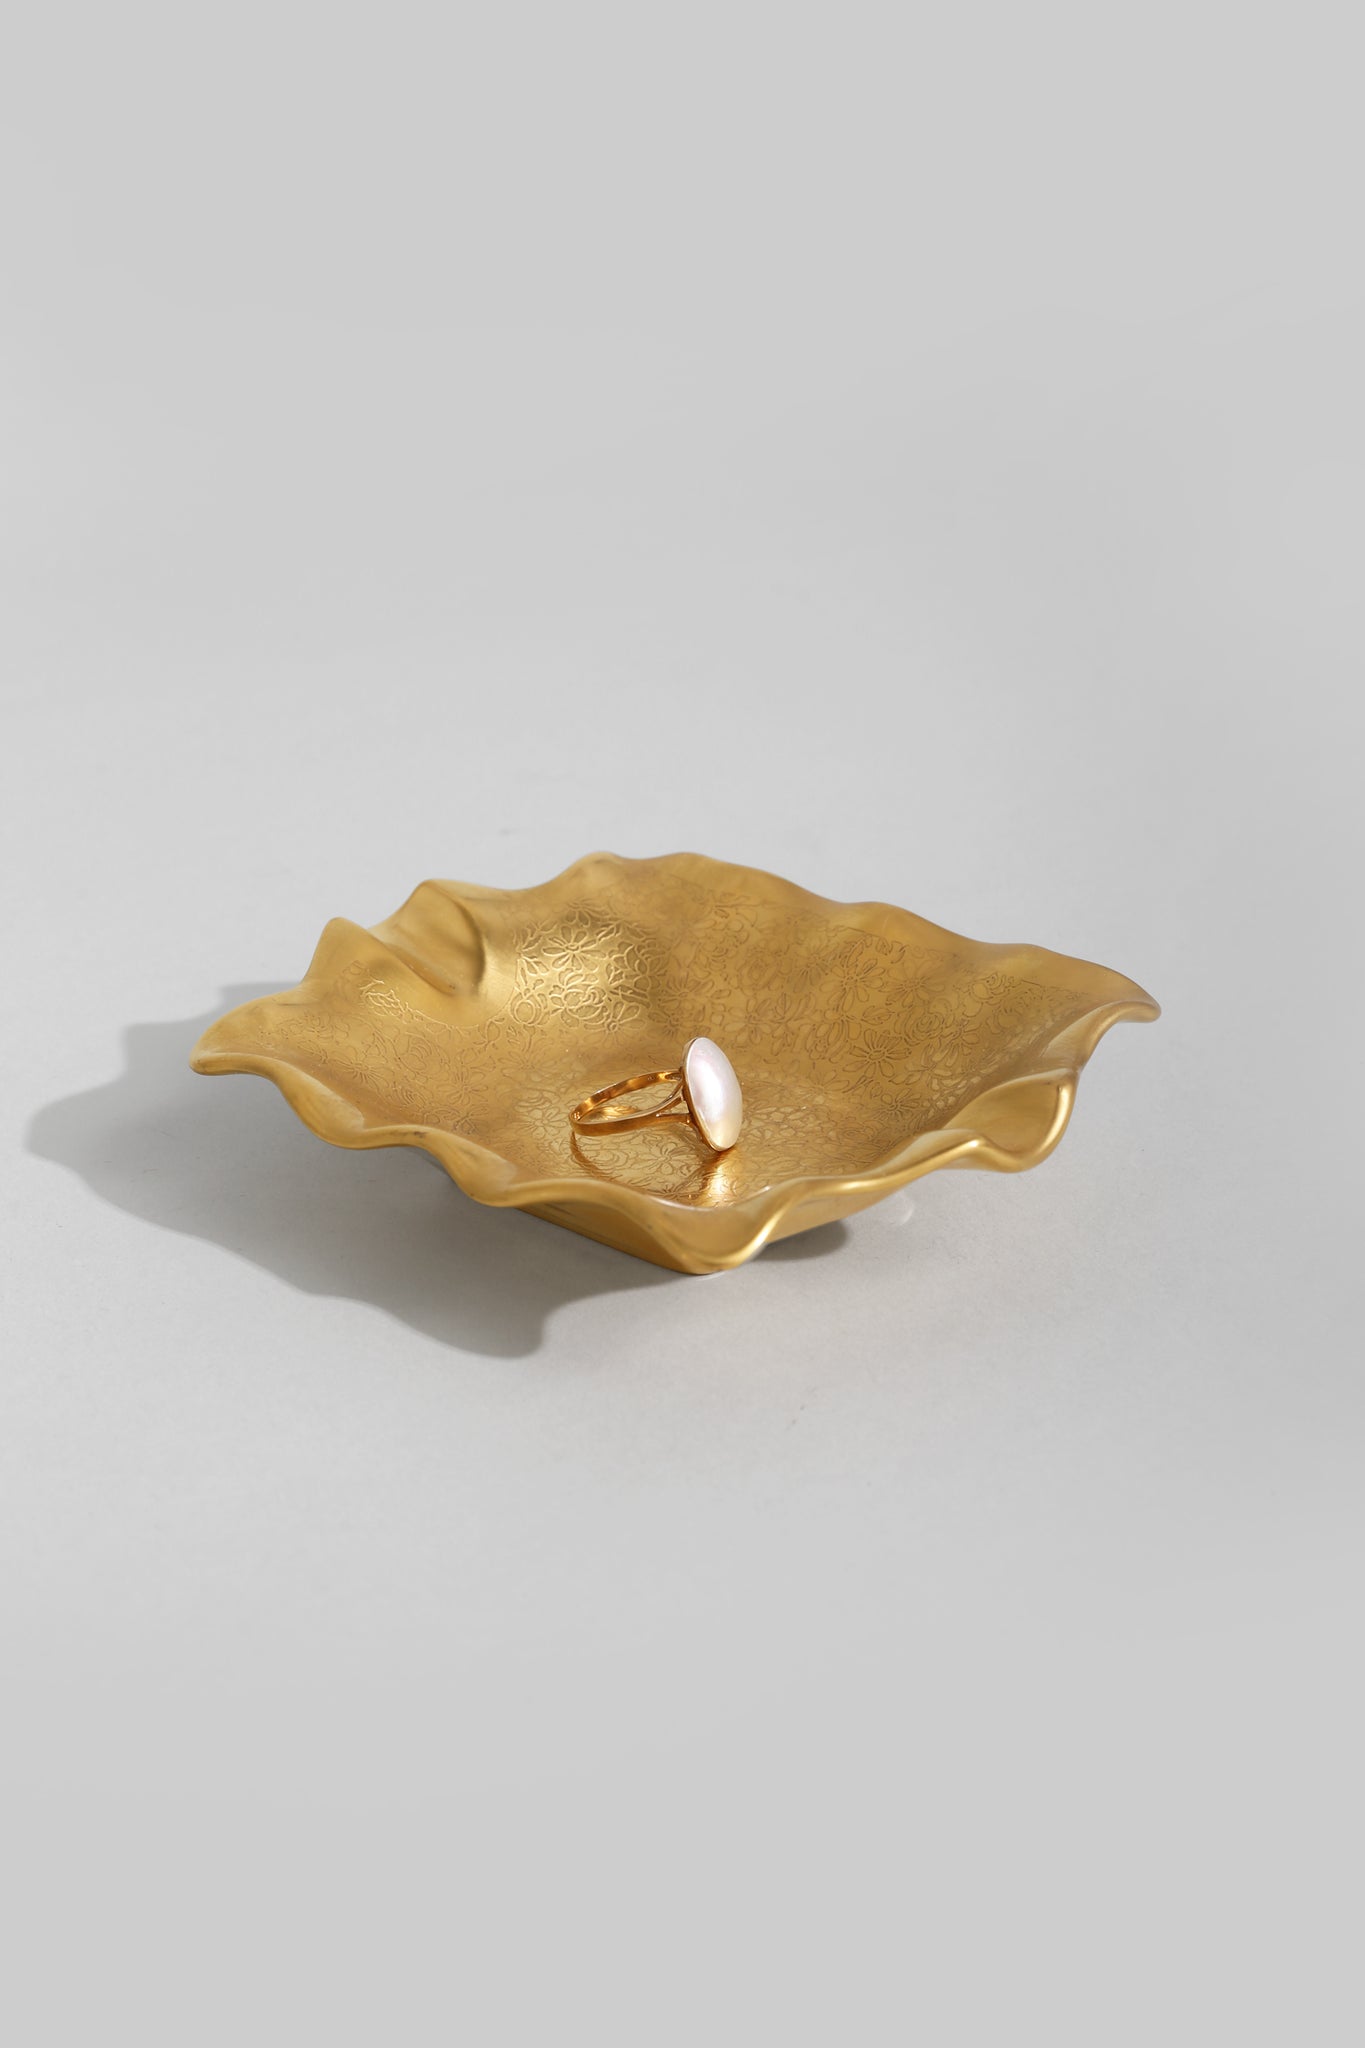 Gold Floral Catchall